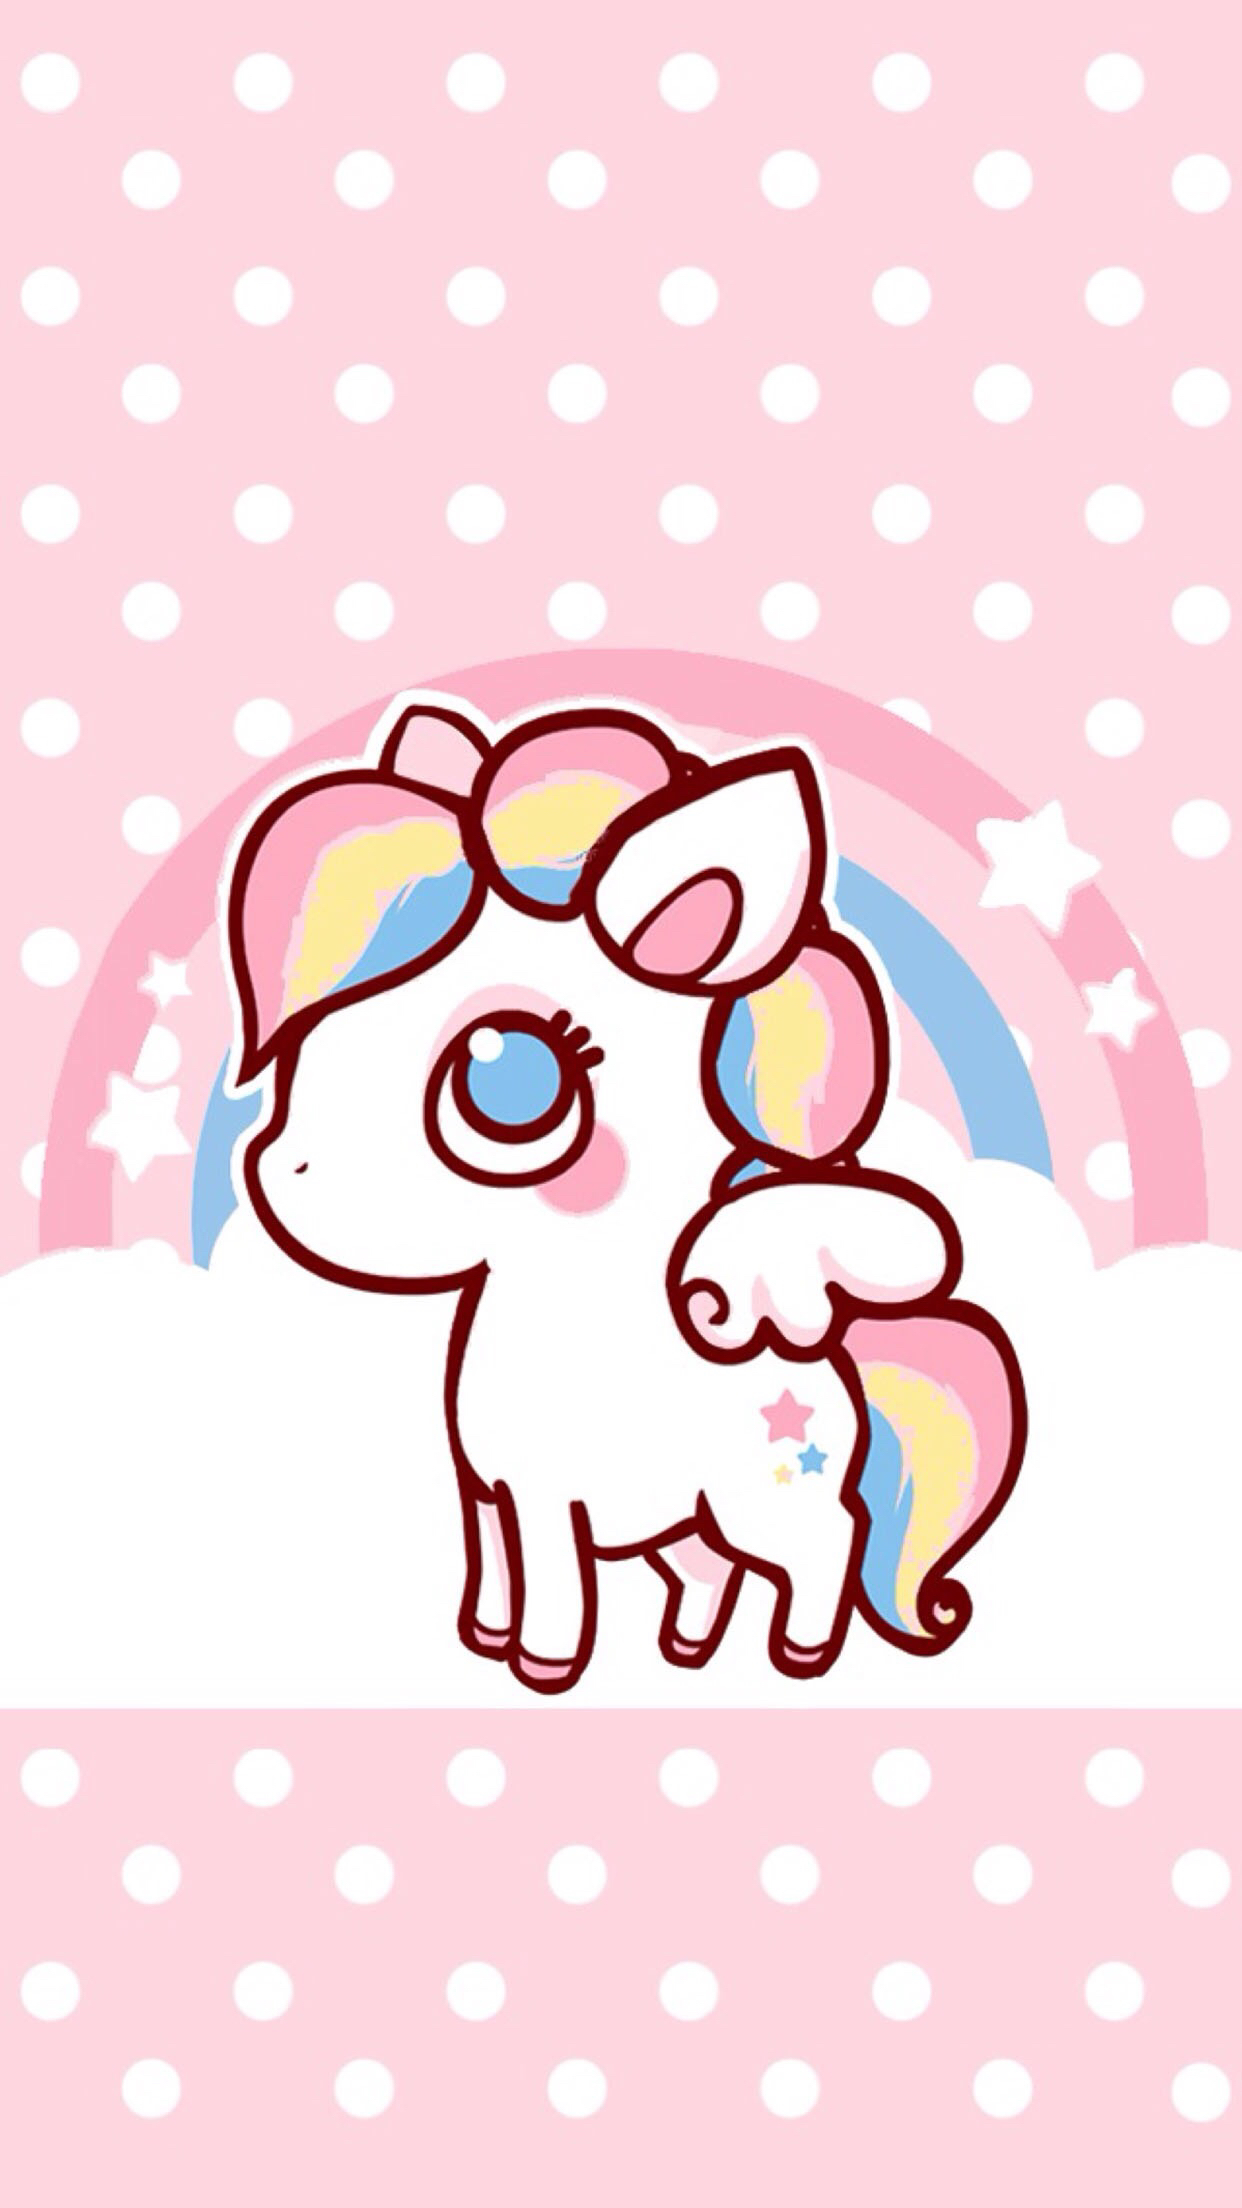 15 Greatest cute wallpaper unicorn pictures You Can Save It free ...